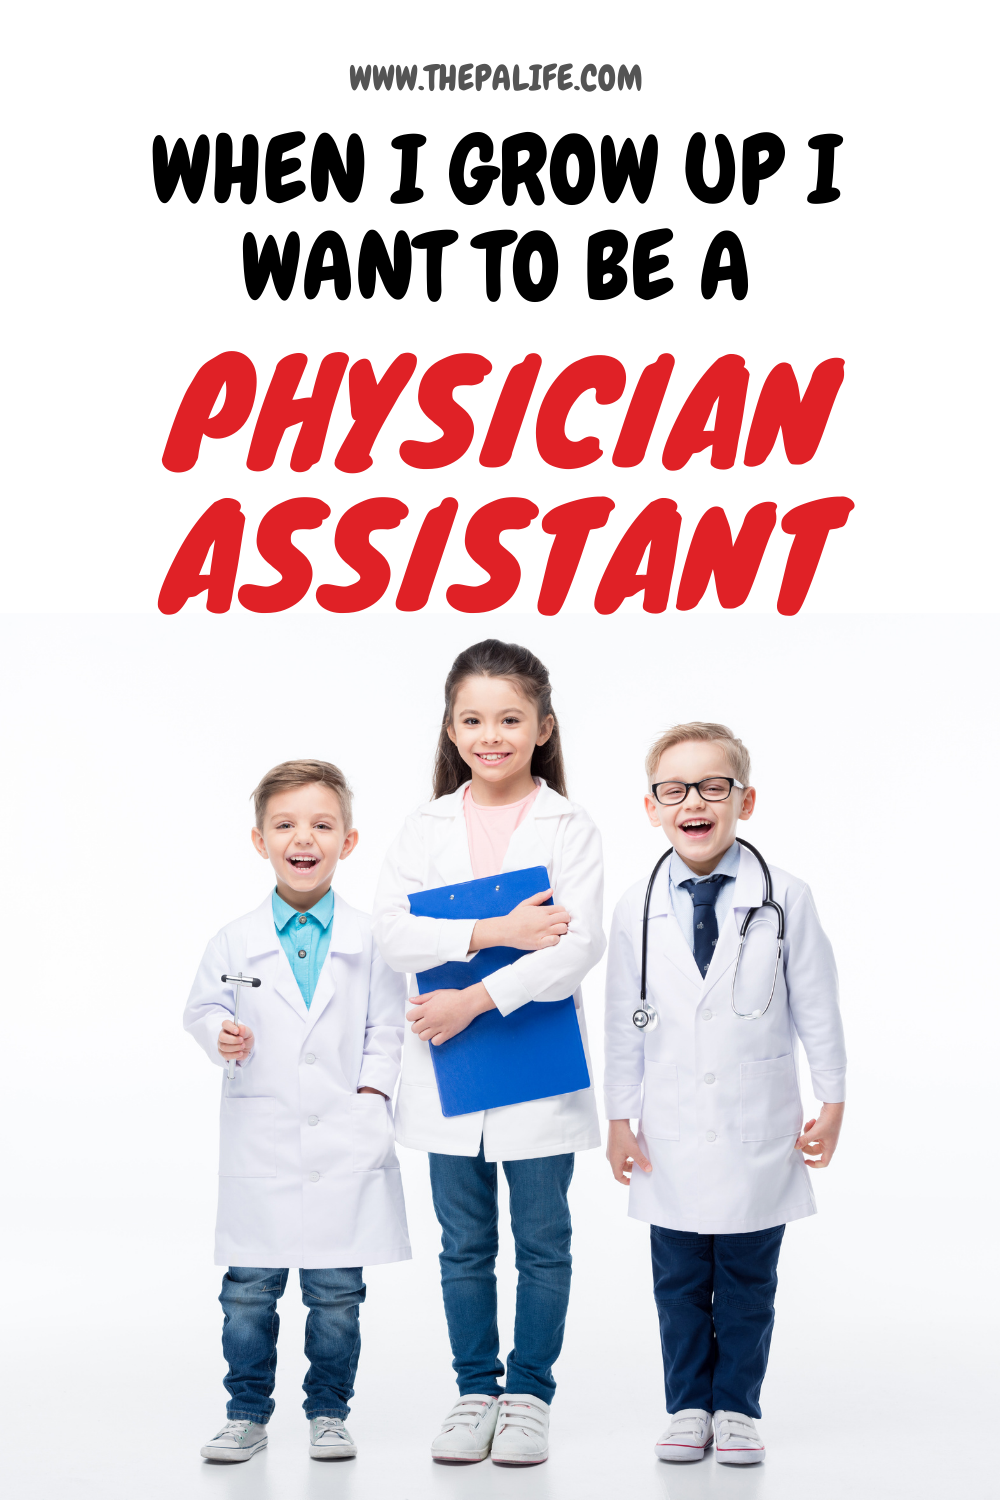 why-do-you-want-to-be-a-physician-assistant-the-physician-assistant-life